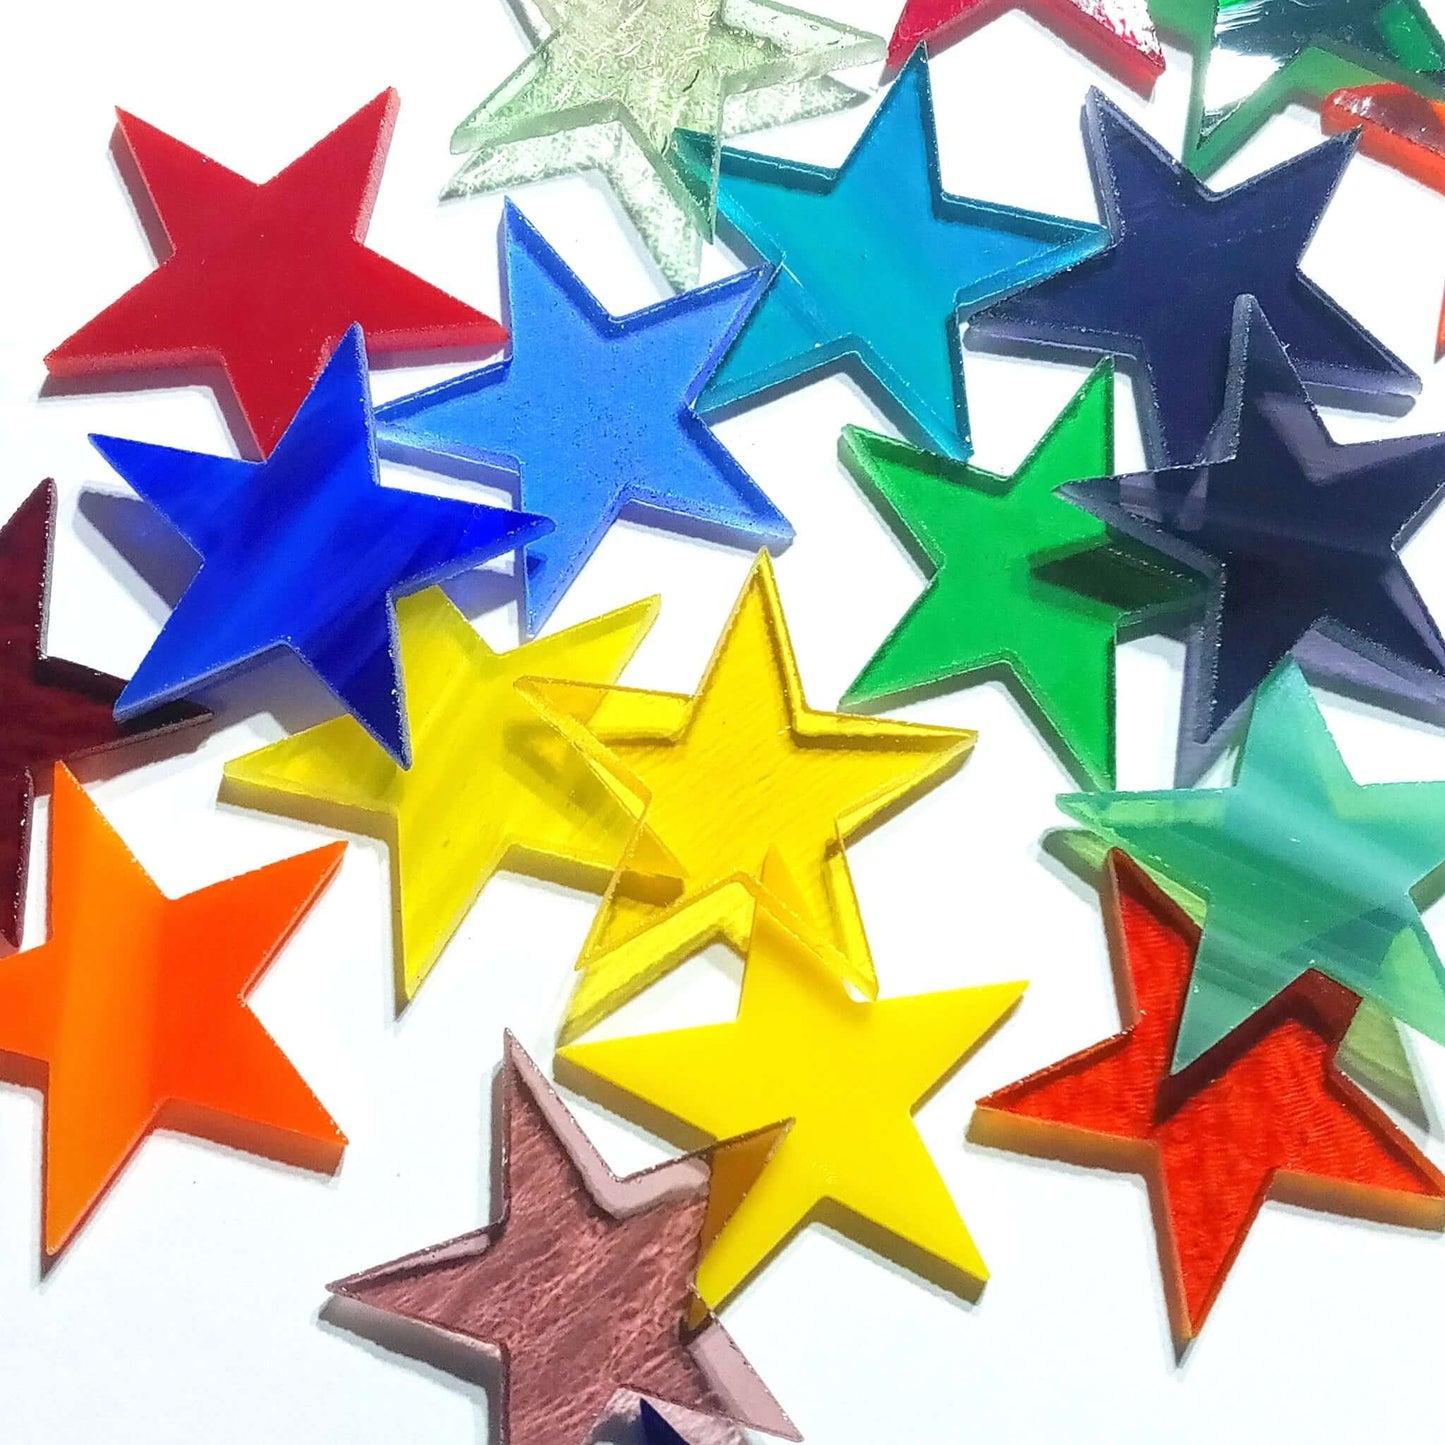 Precut Stained Glass Stars, Assorted Colors, 2 inch Glass Stars for Mosaics, Jewelry, Stained Glass